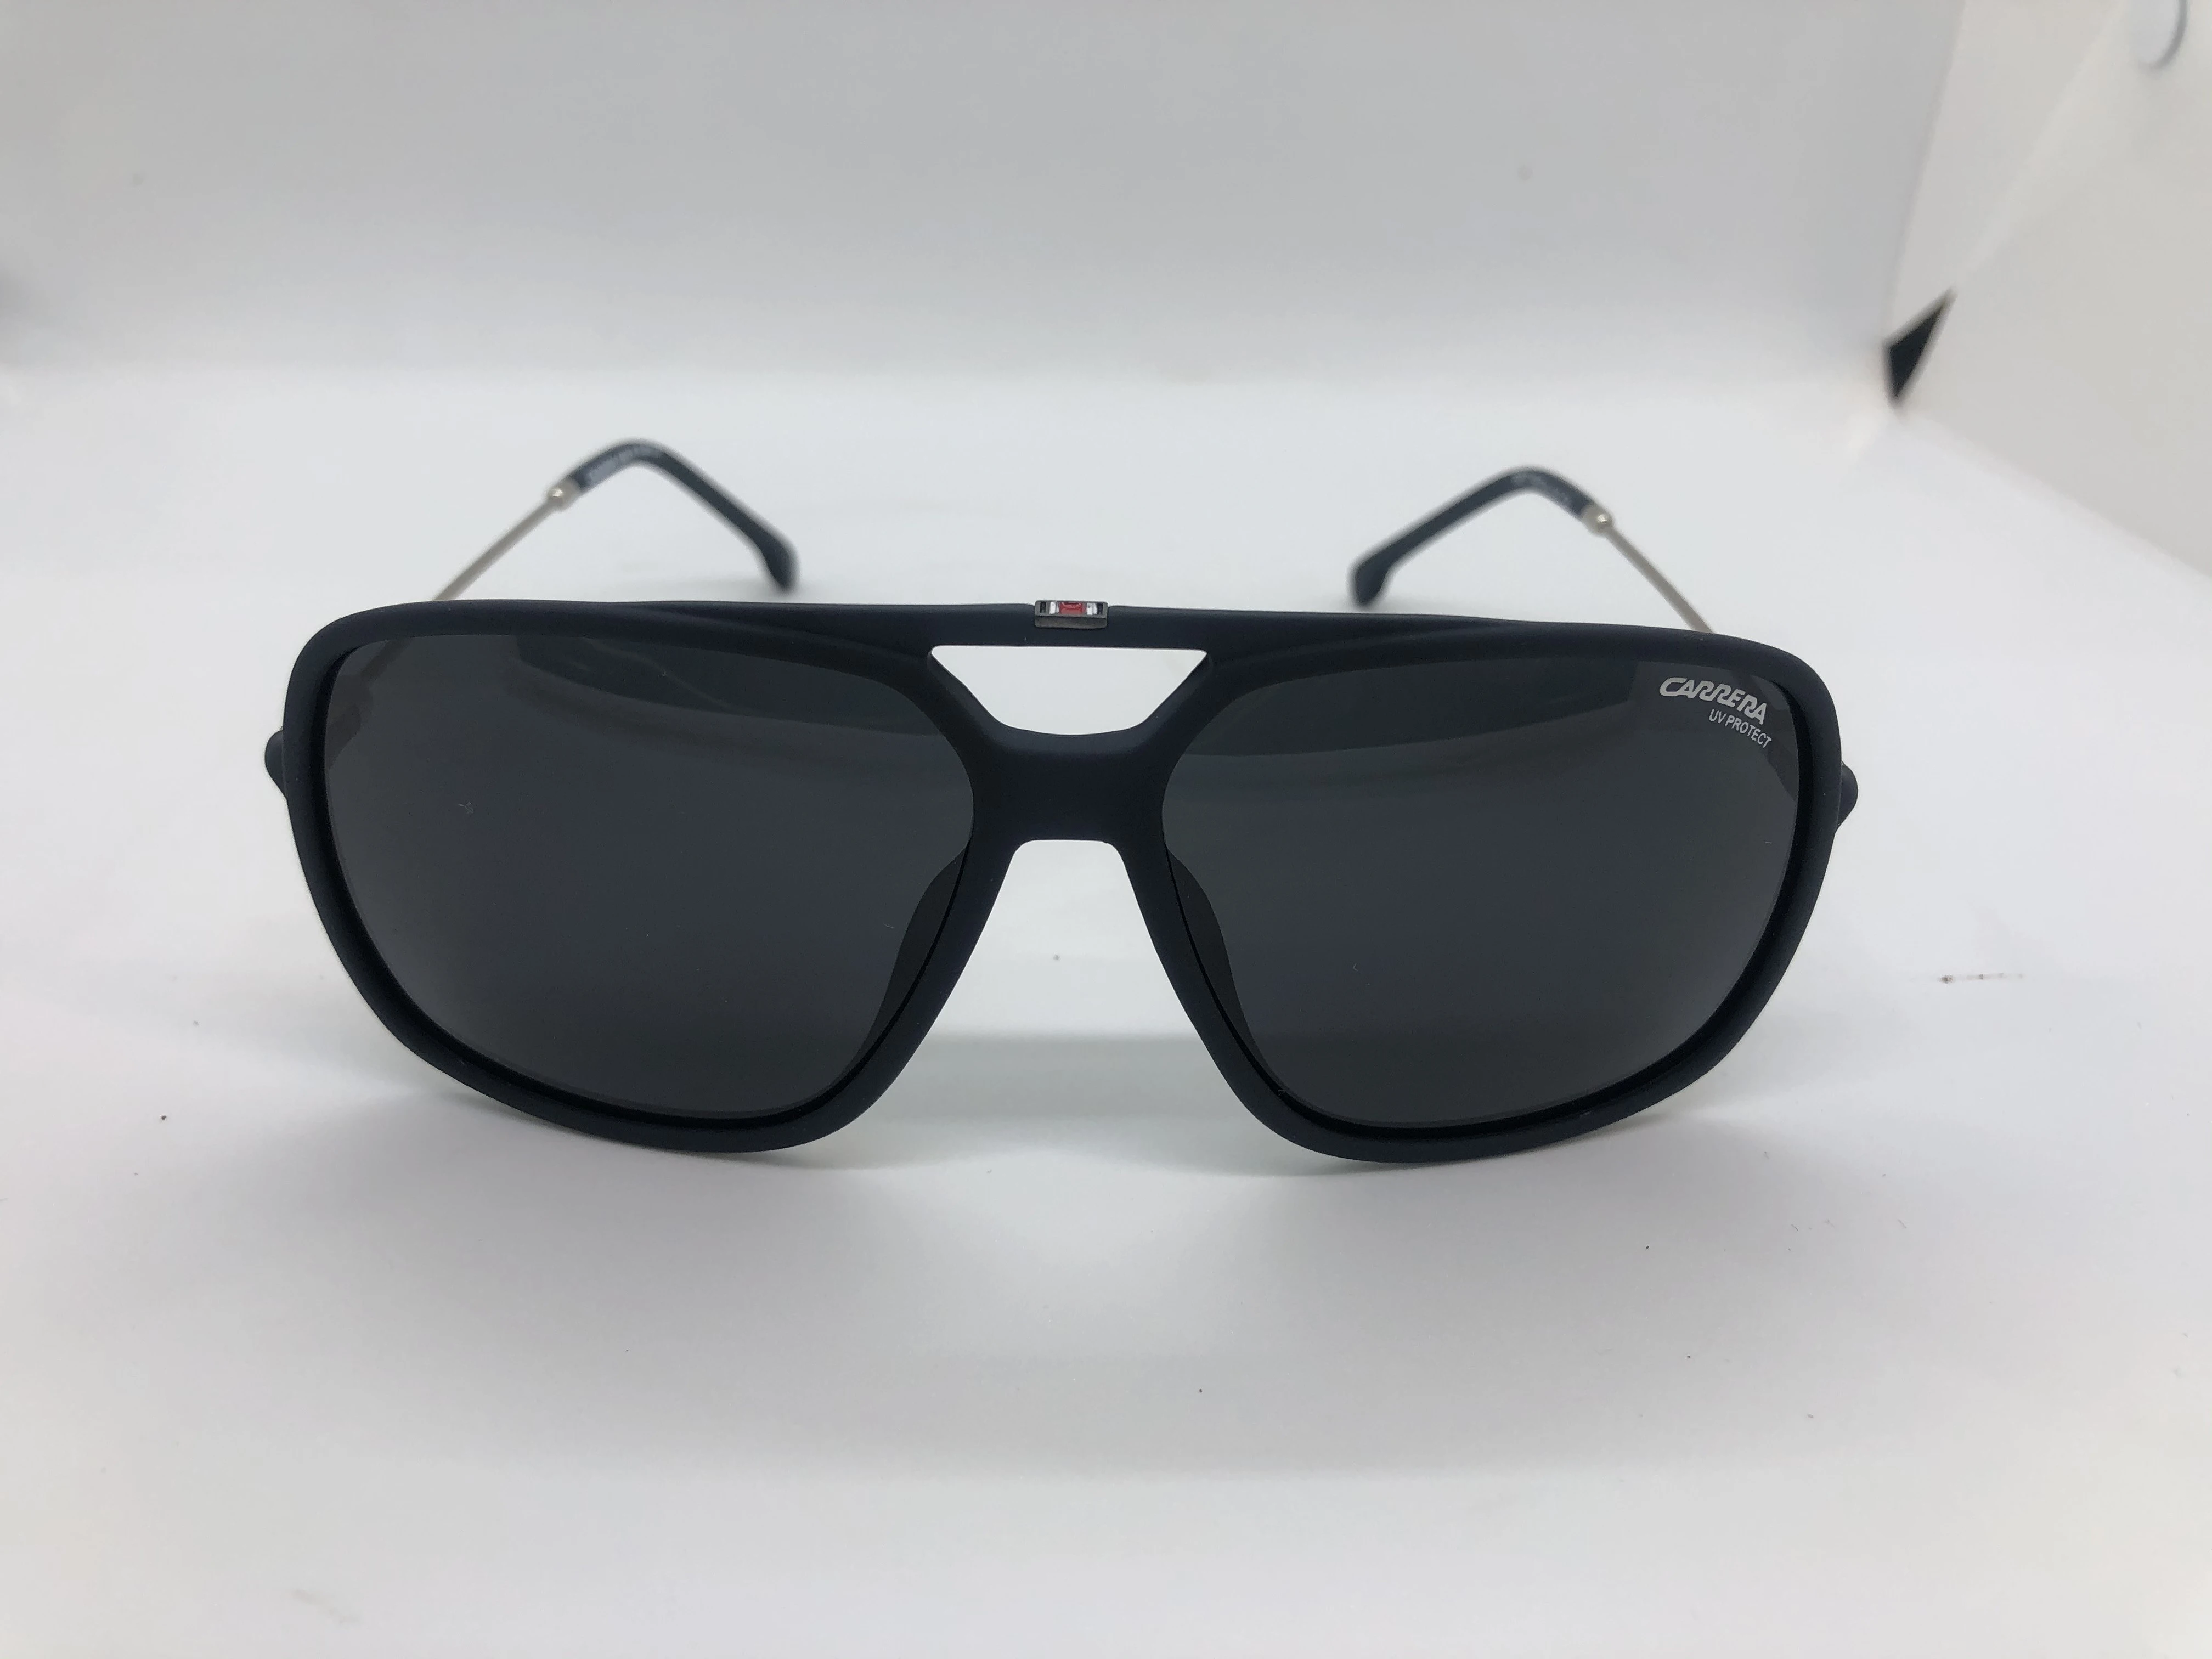 Sunglasses - black from Carrera - with a petroleum polycarbonate frame - black lenses - and silver metal arms - for men